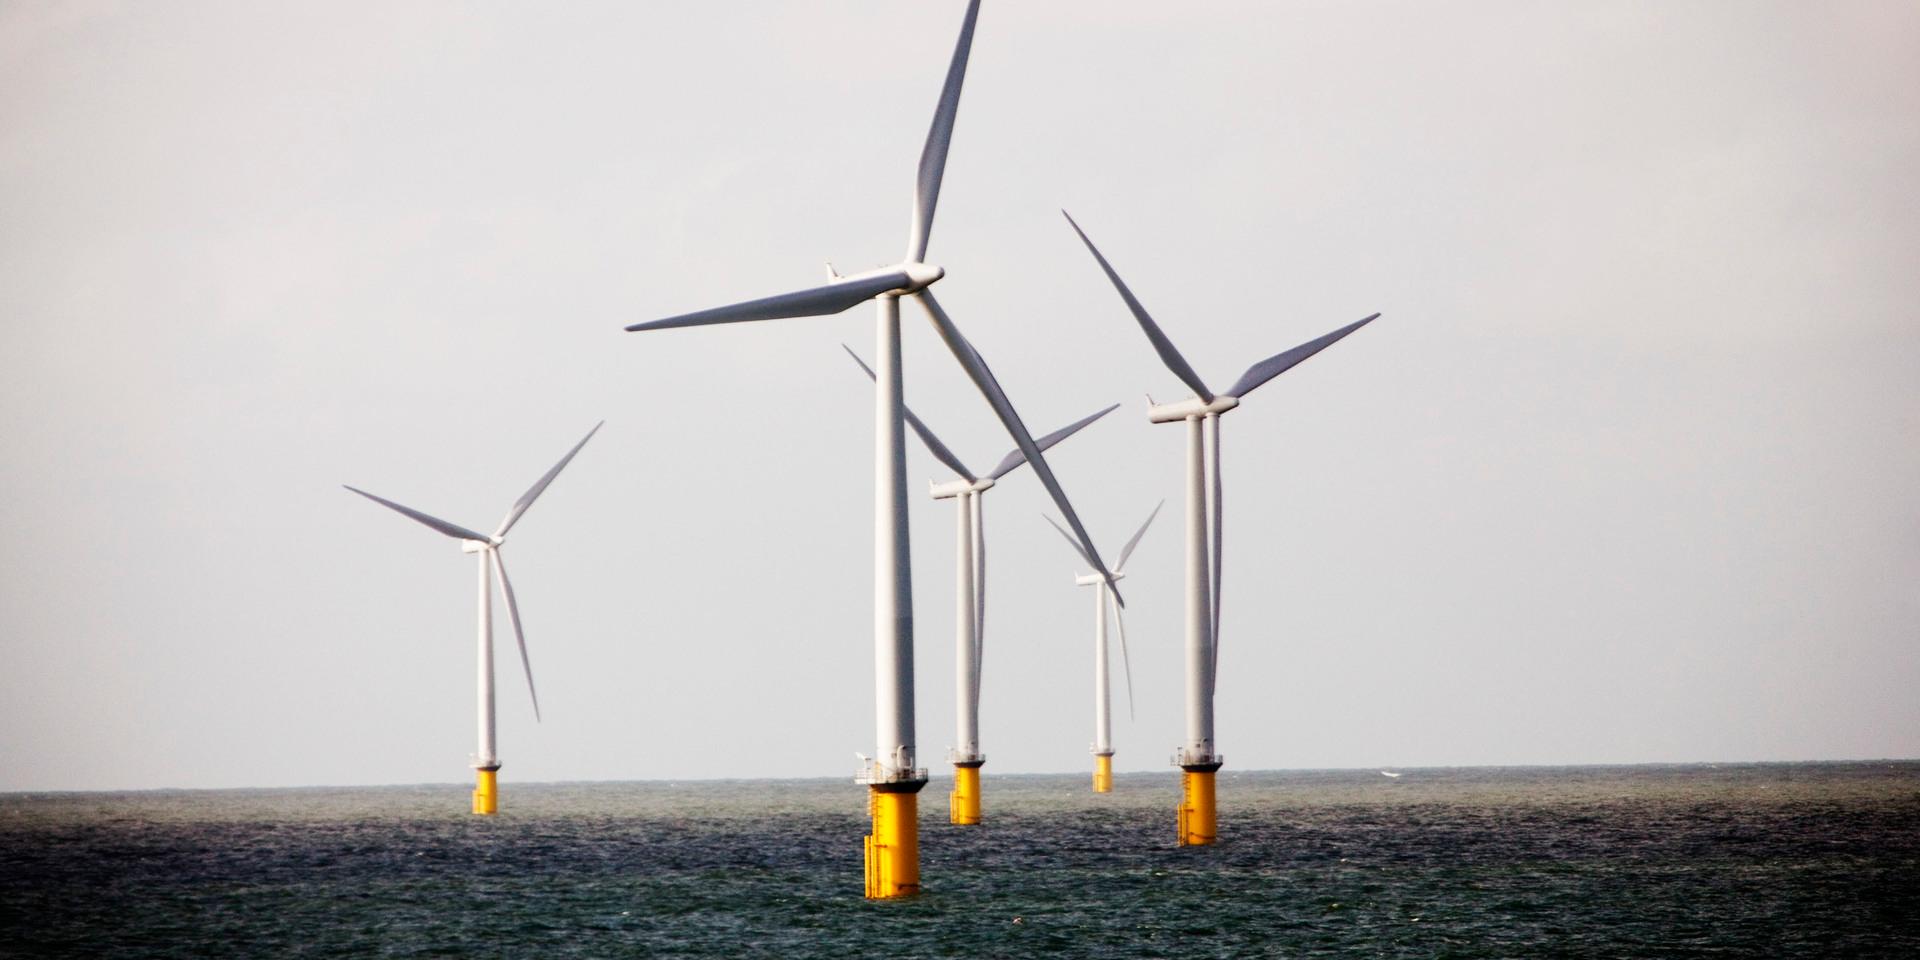 Some of the wind turbines which make up part of one of the world world's biggest offshore wind farm operated by Dong Enegry is seen in the North Sea, 19 miles (30 kilometers) west of Denmark's Jutland peninsula, Thursday, Sept. 17, 2009.  Denmark's Crown Prince Frederik, flipped a switch Thursday to start 91 wind turbines in the North Sea,which operator Dong Energy says has a production capacity of 209 megawatts, enough to power 200,000 homes.  Denmark, a pioneer in wind energy, has six other offshore wind farms.